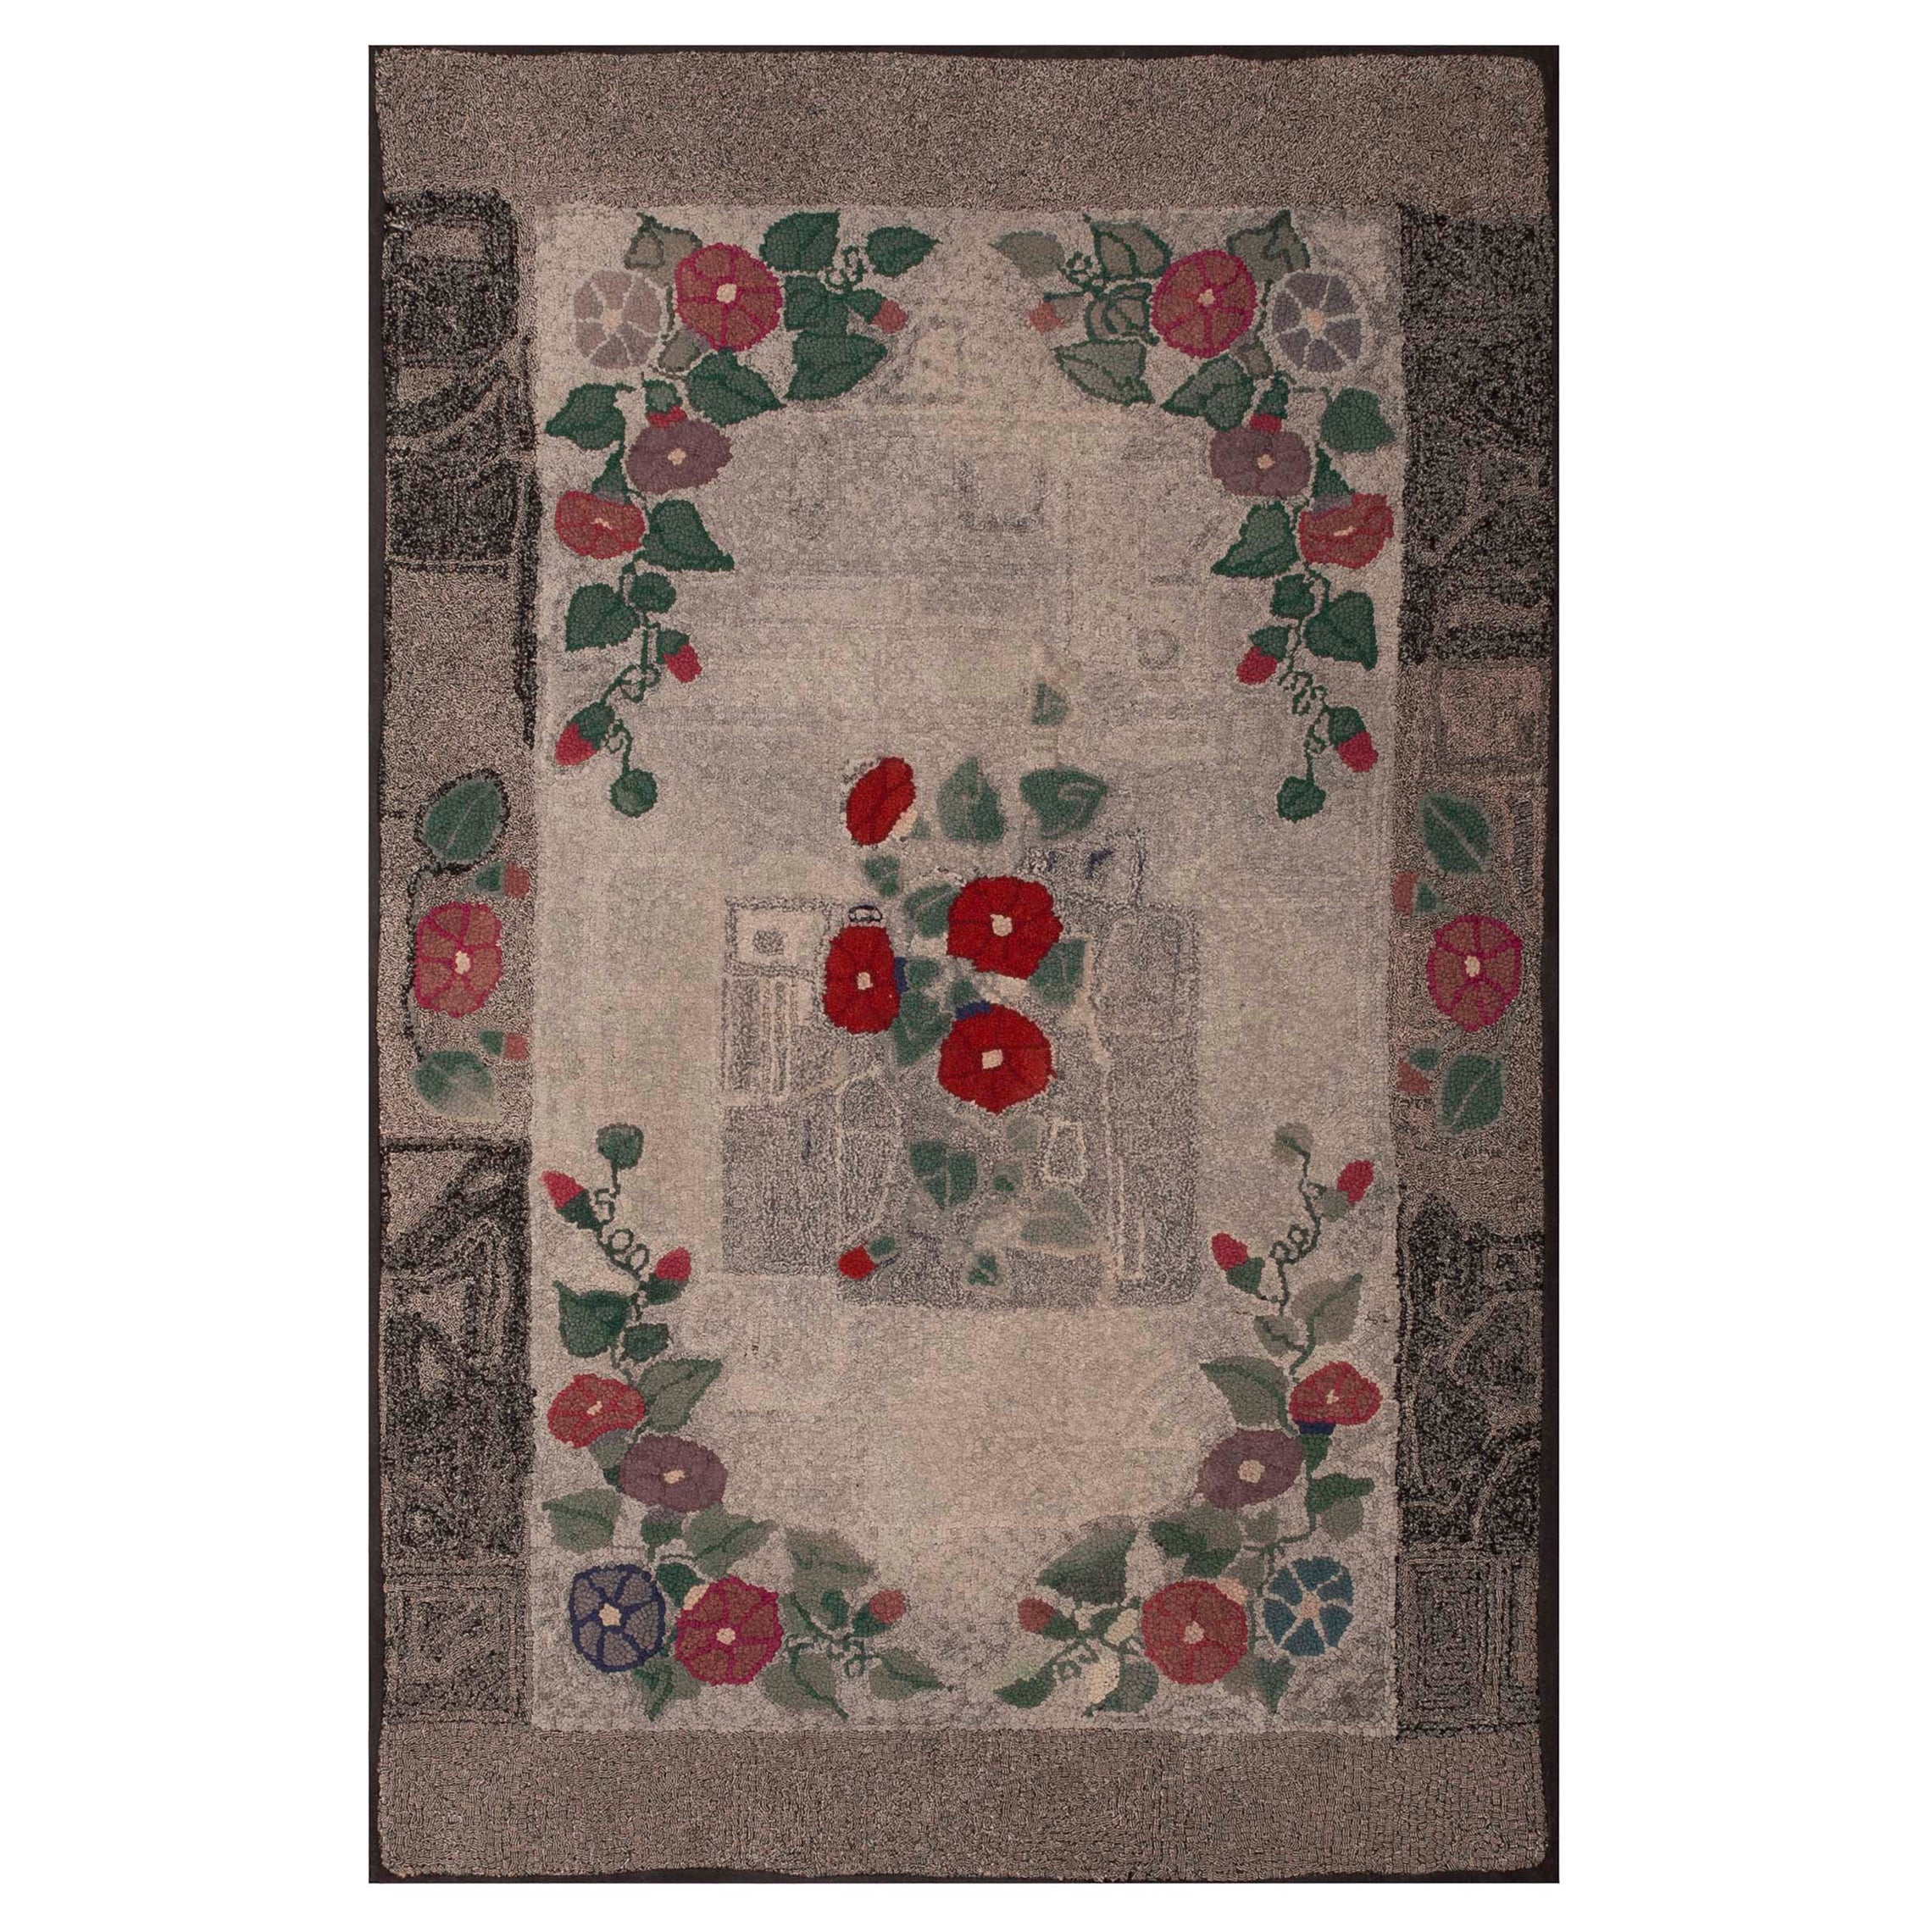 1930s American Hooked Rug ( 3 x 4'9" - 92 x 145 cm ) For Sale